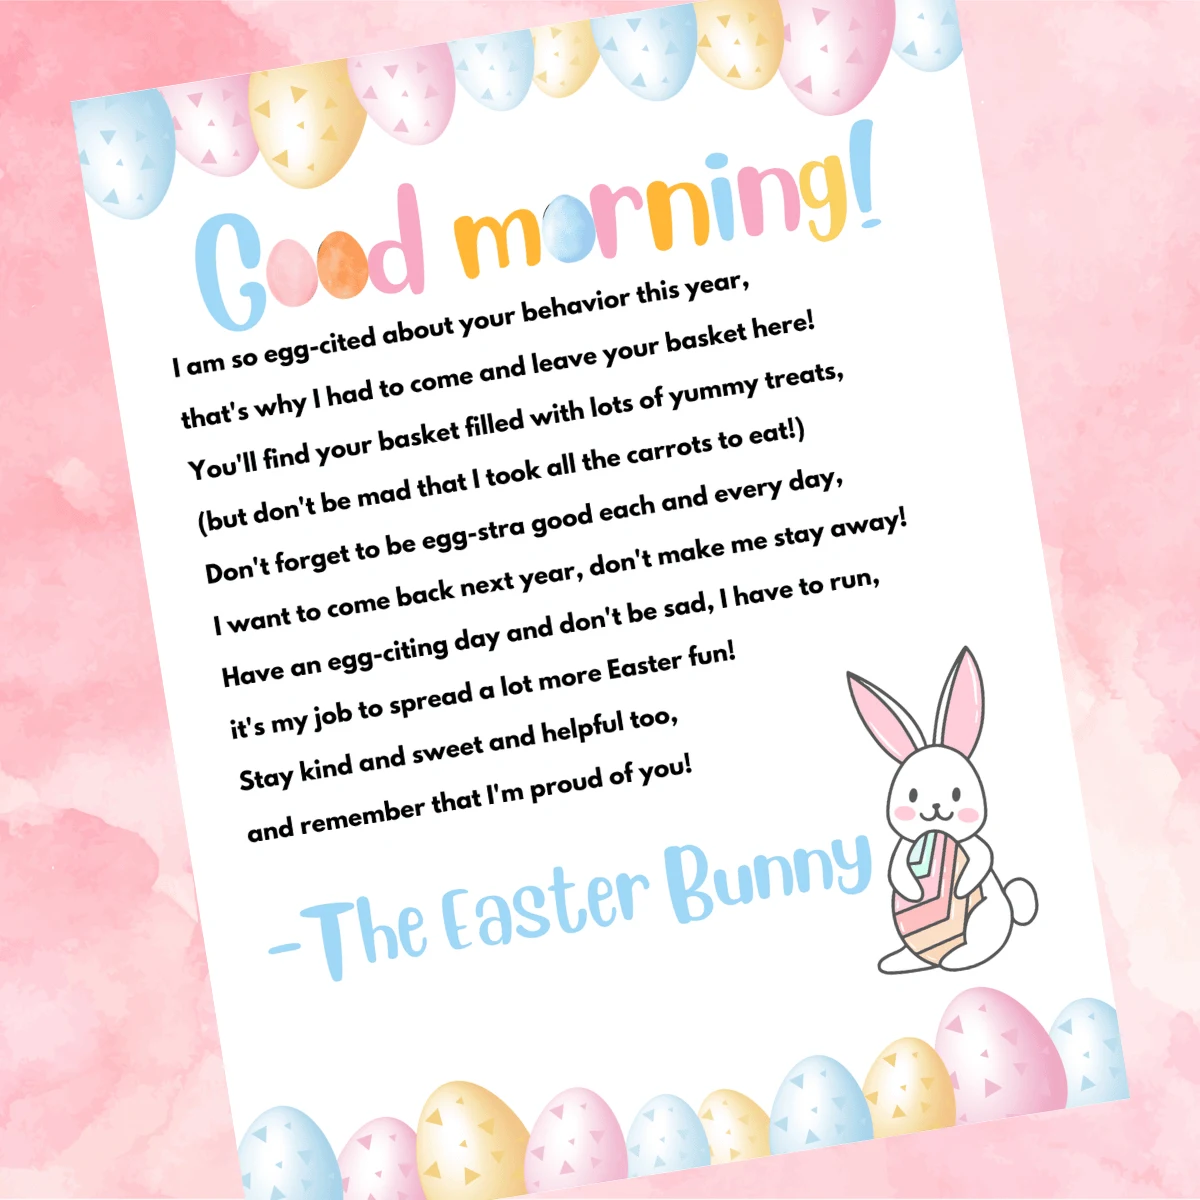 Letter from the Easter Bunny to a child